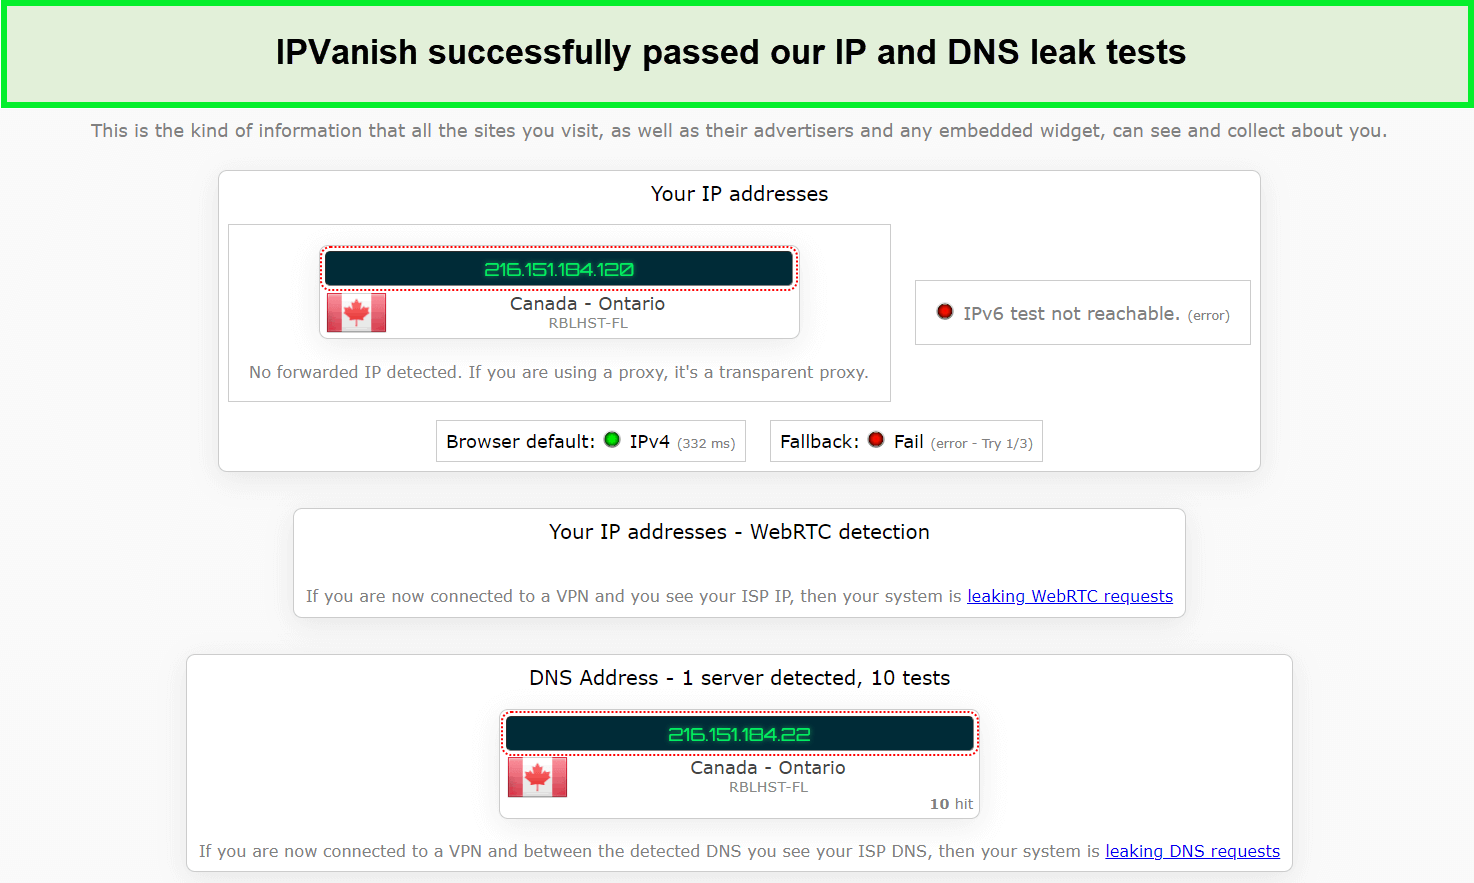 ipvanish-passed-dns-and-ip-leak-test-For Japanese Users